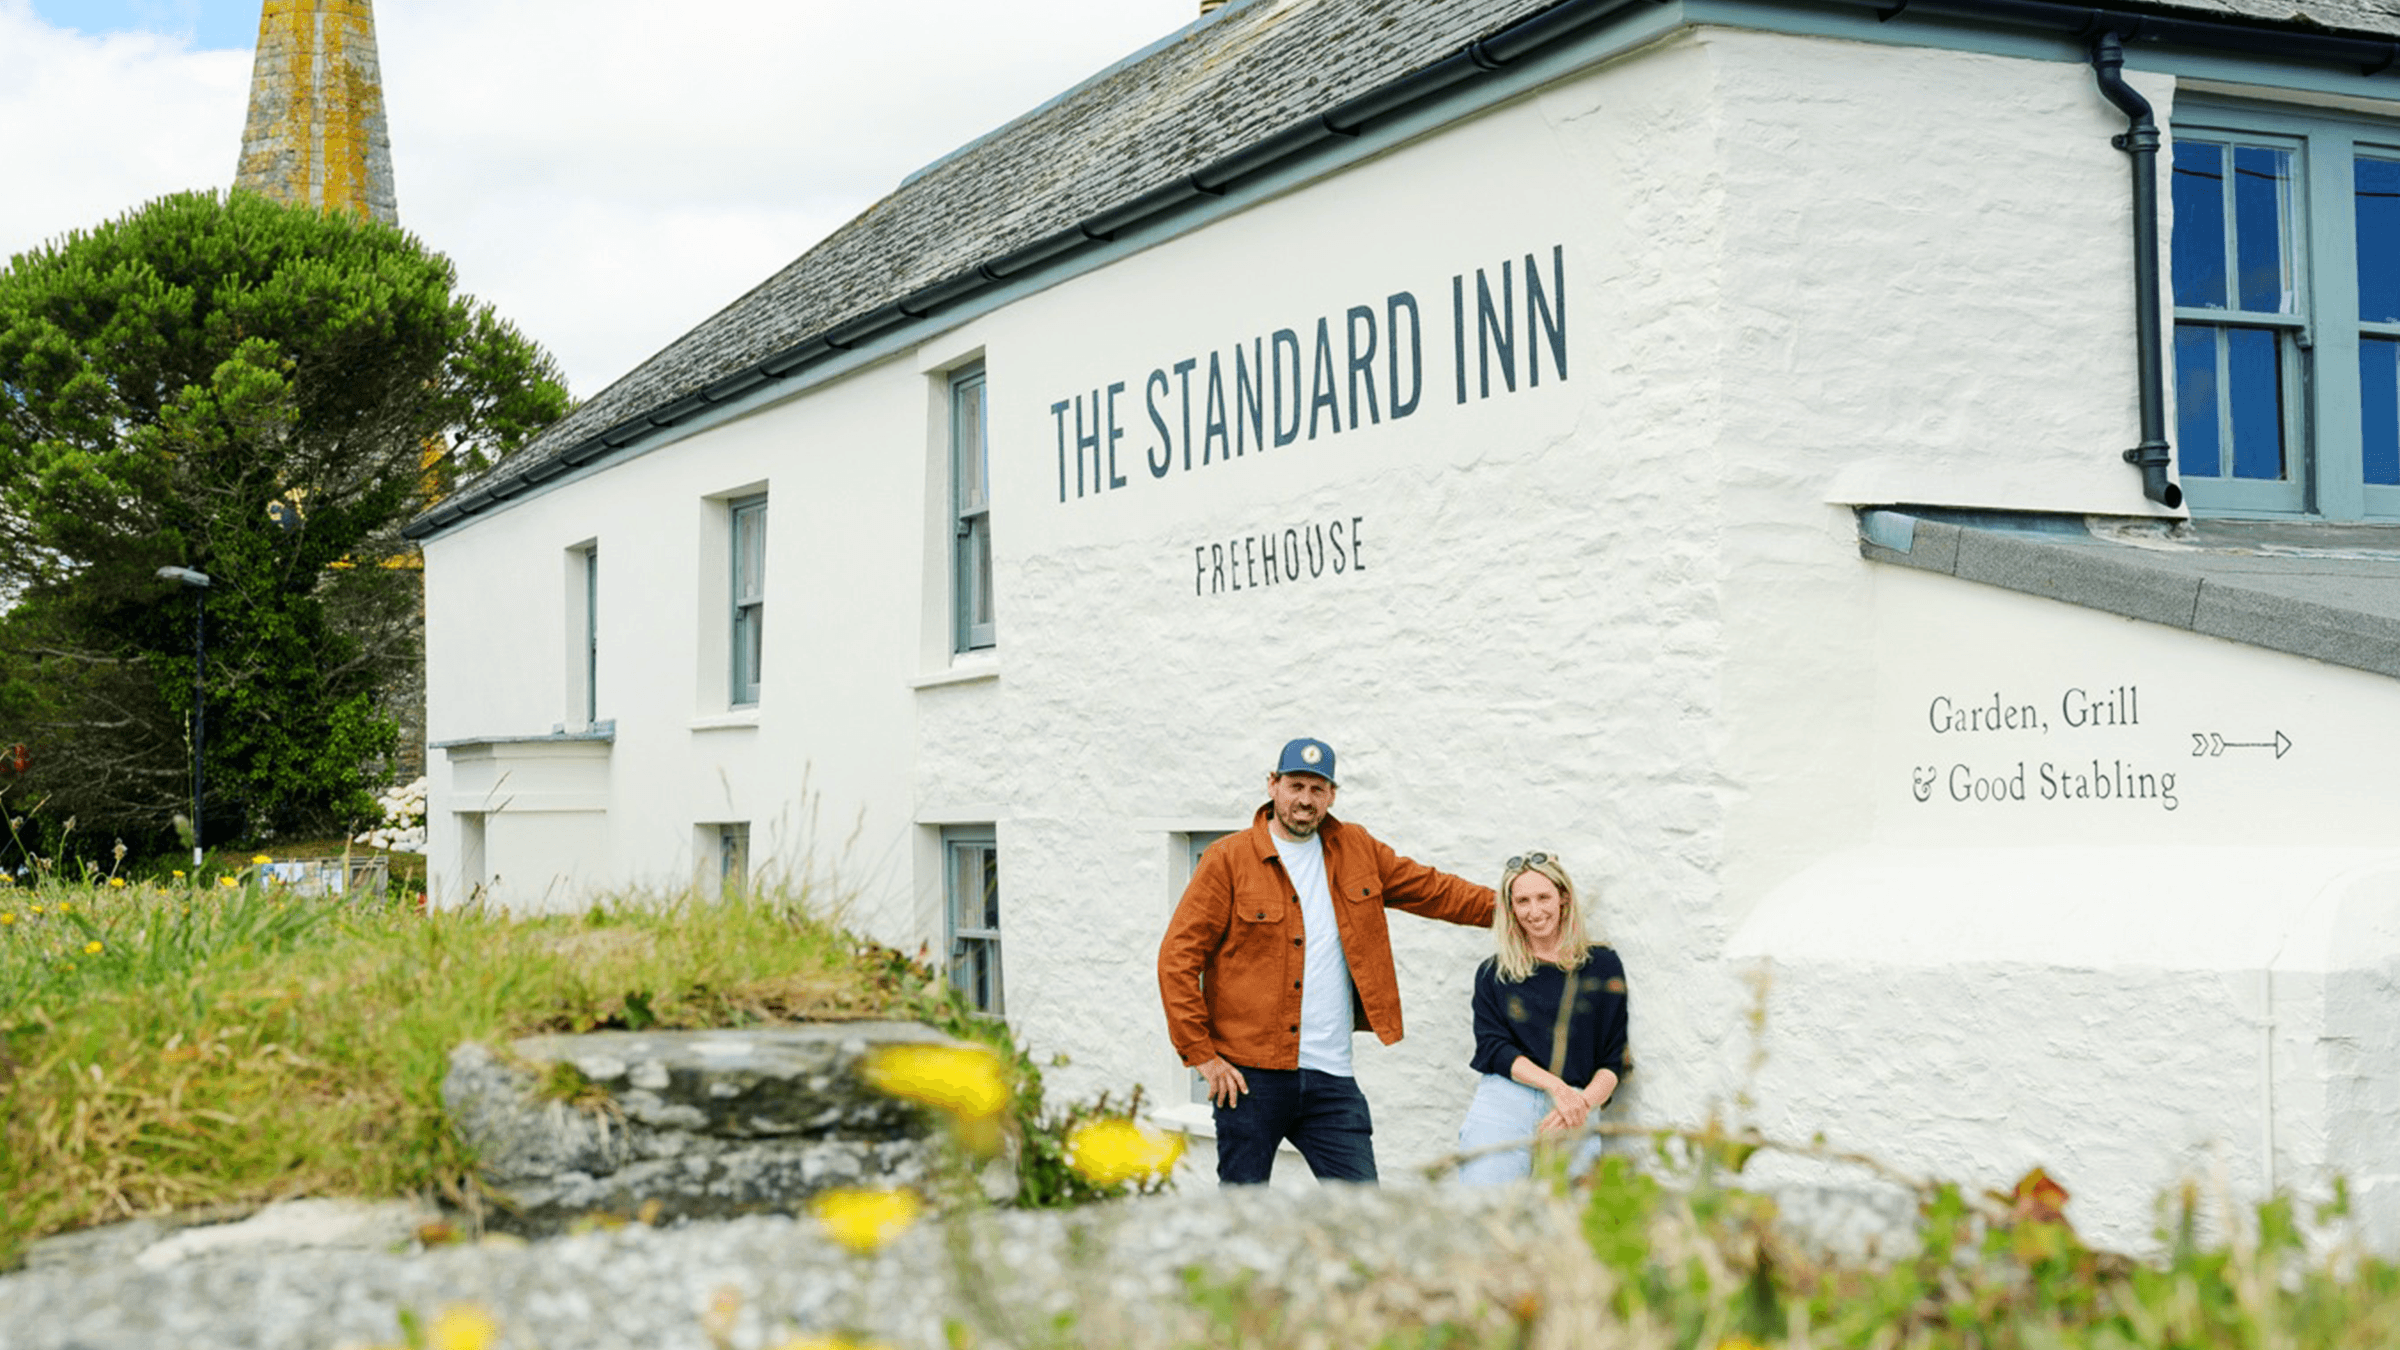 “It’s about bringing people together”: in conversation with Simon Stallard, MD and Founder of the Hidden Hut and the Standard Inn